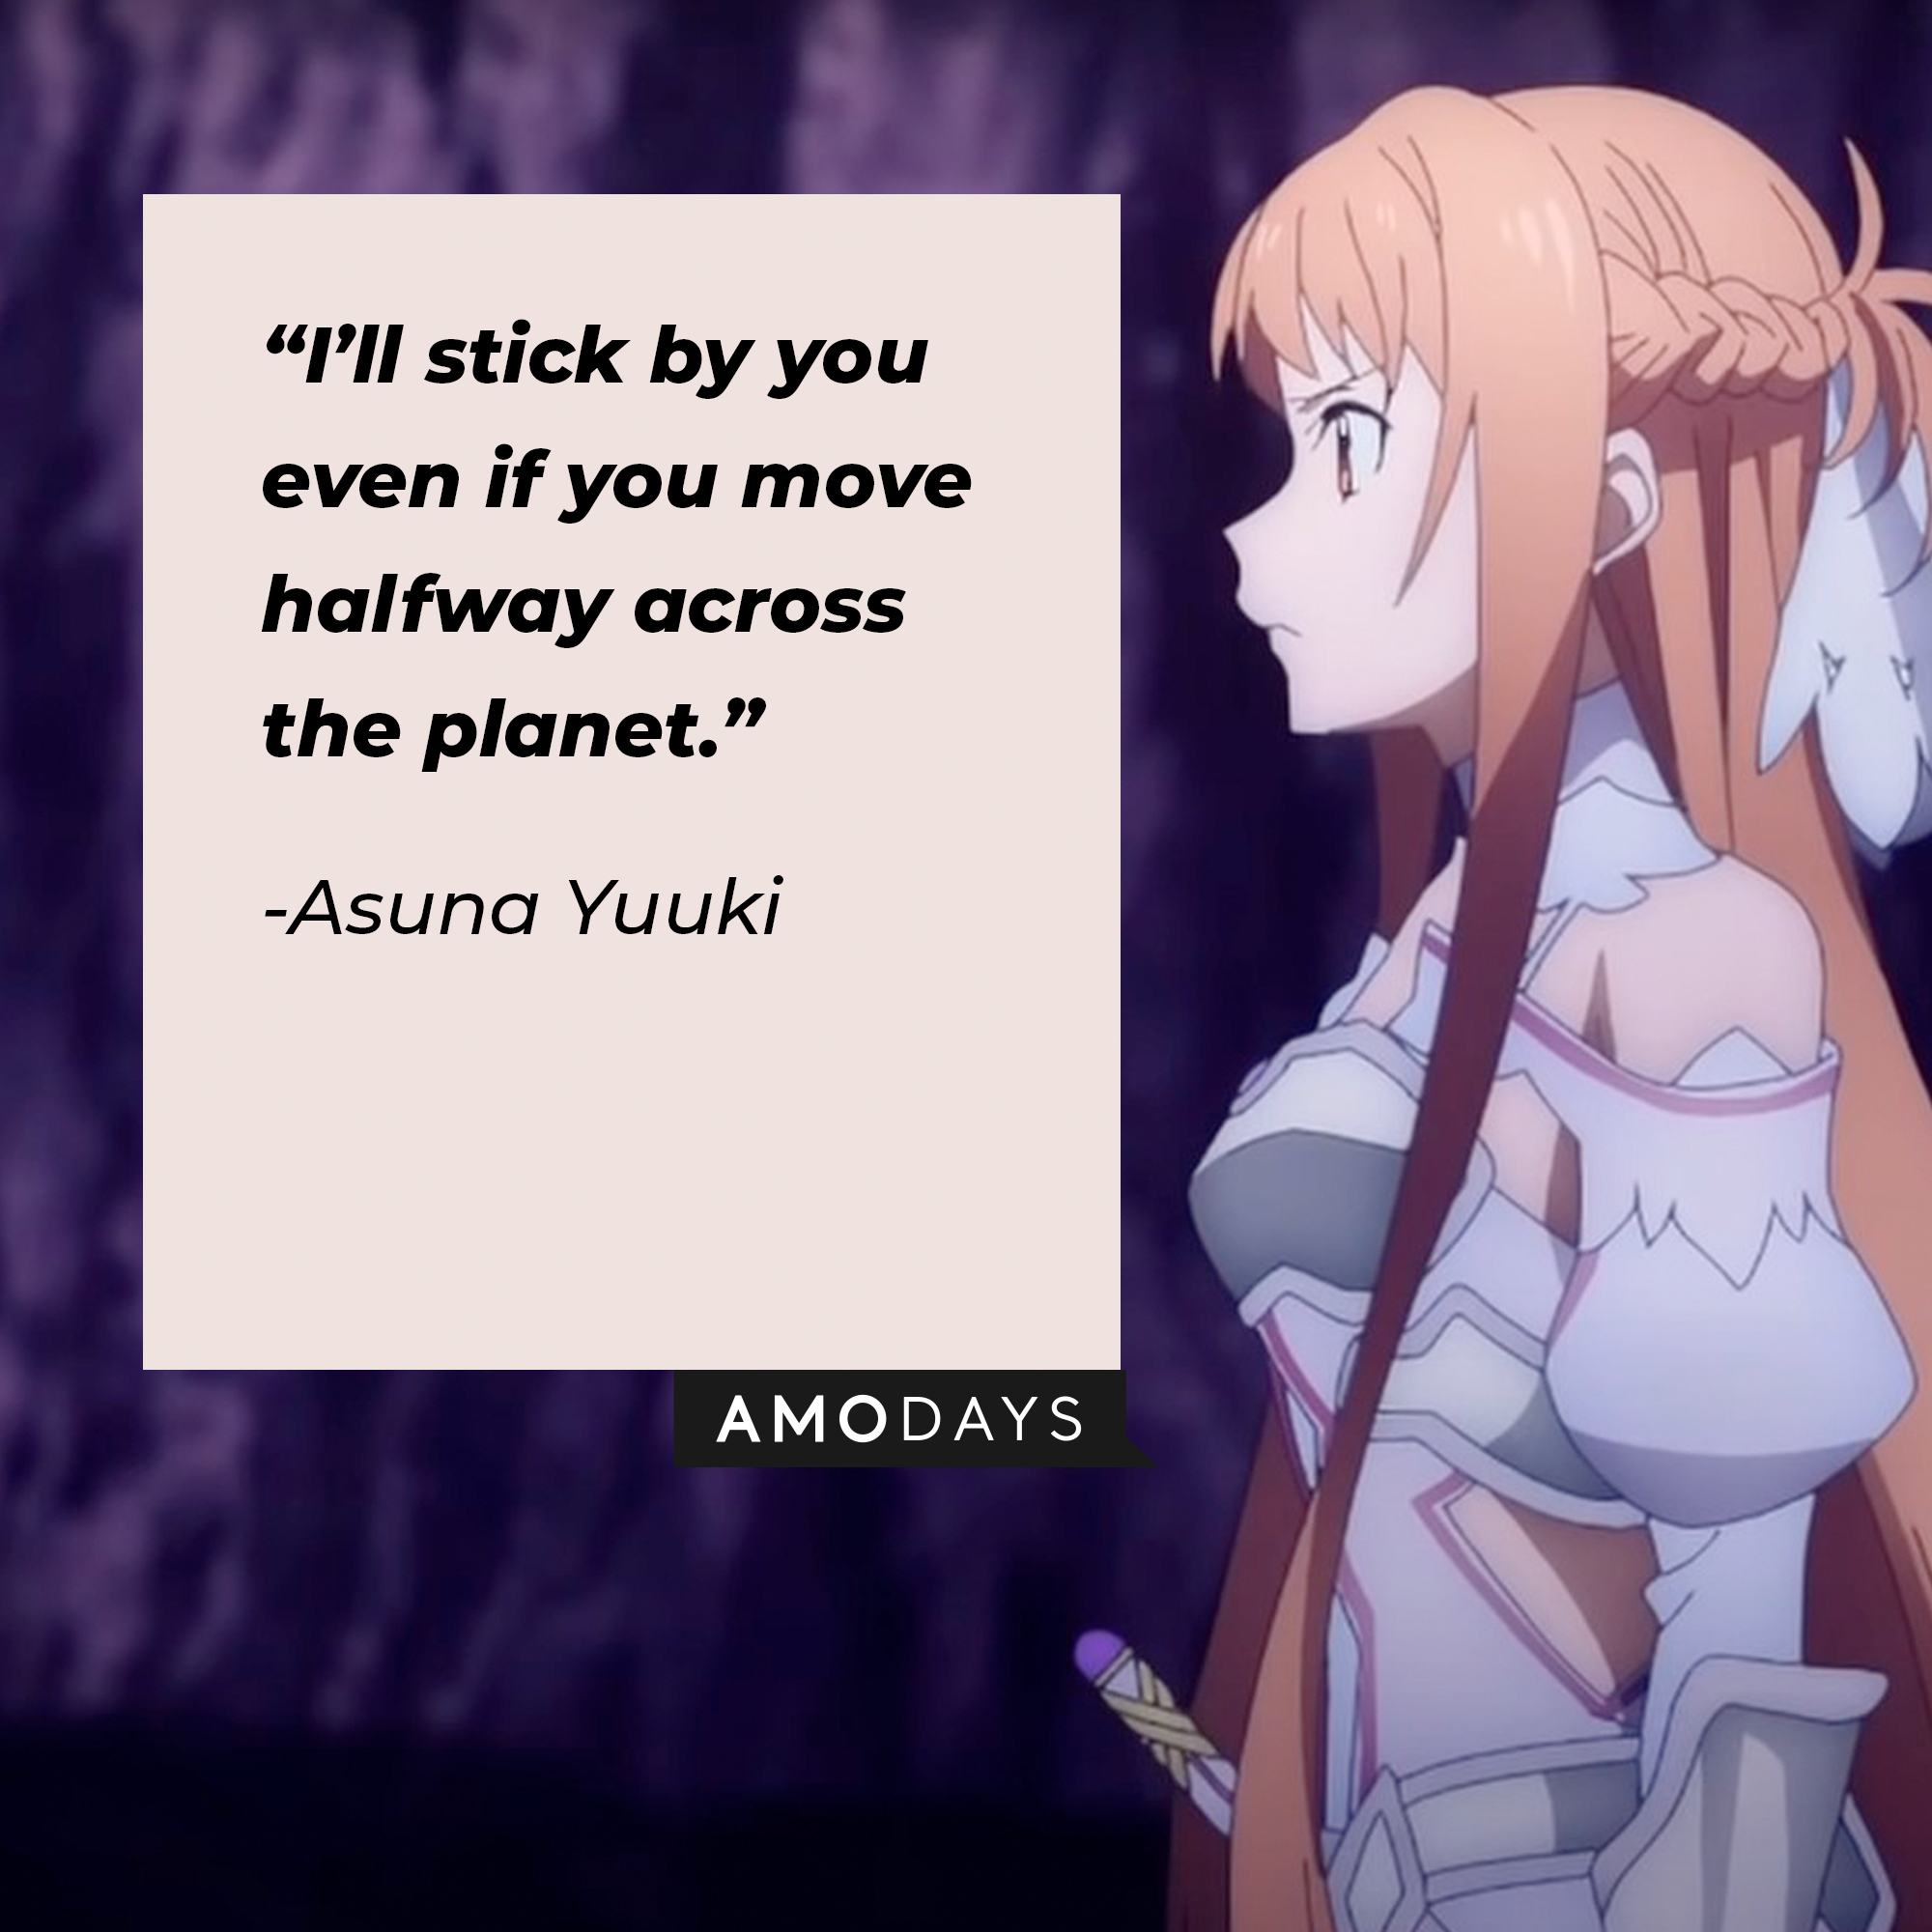 A picture of Asuna Yuuki with her quote:“I’ll stick by you even if you move halfway across the planet.” | Source: facebook.com/SwordArtOnlineUSA